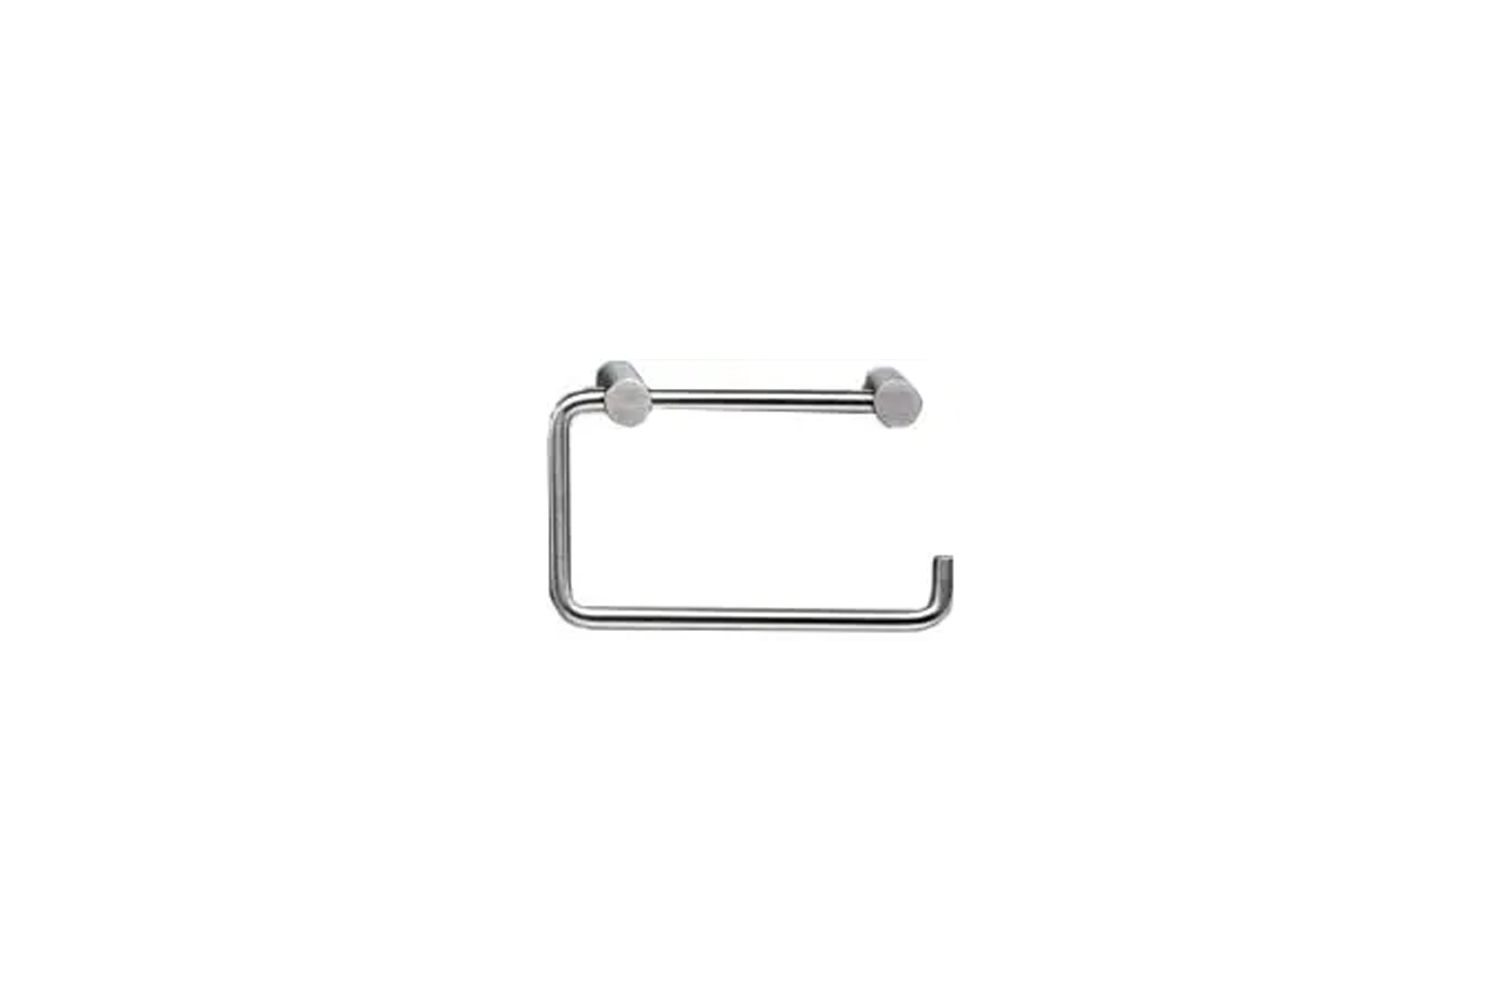 the vola toilet roll holder (t\1\2 bp \16) is \$\14\2.50 at quality bath. 19